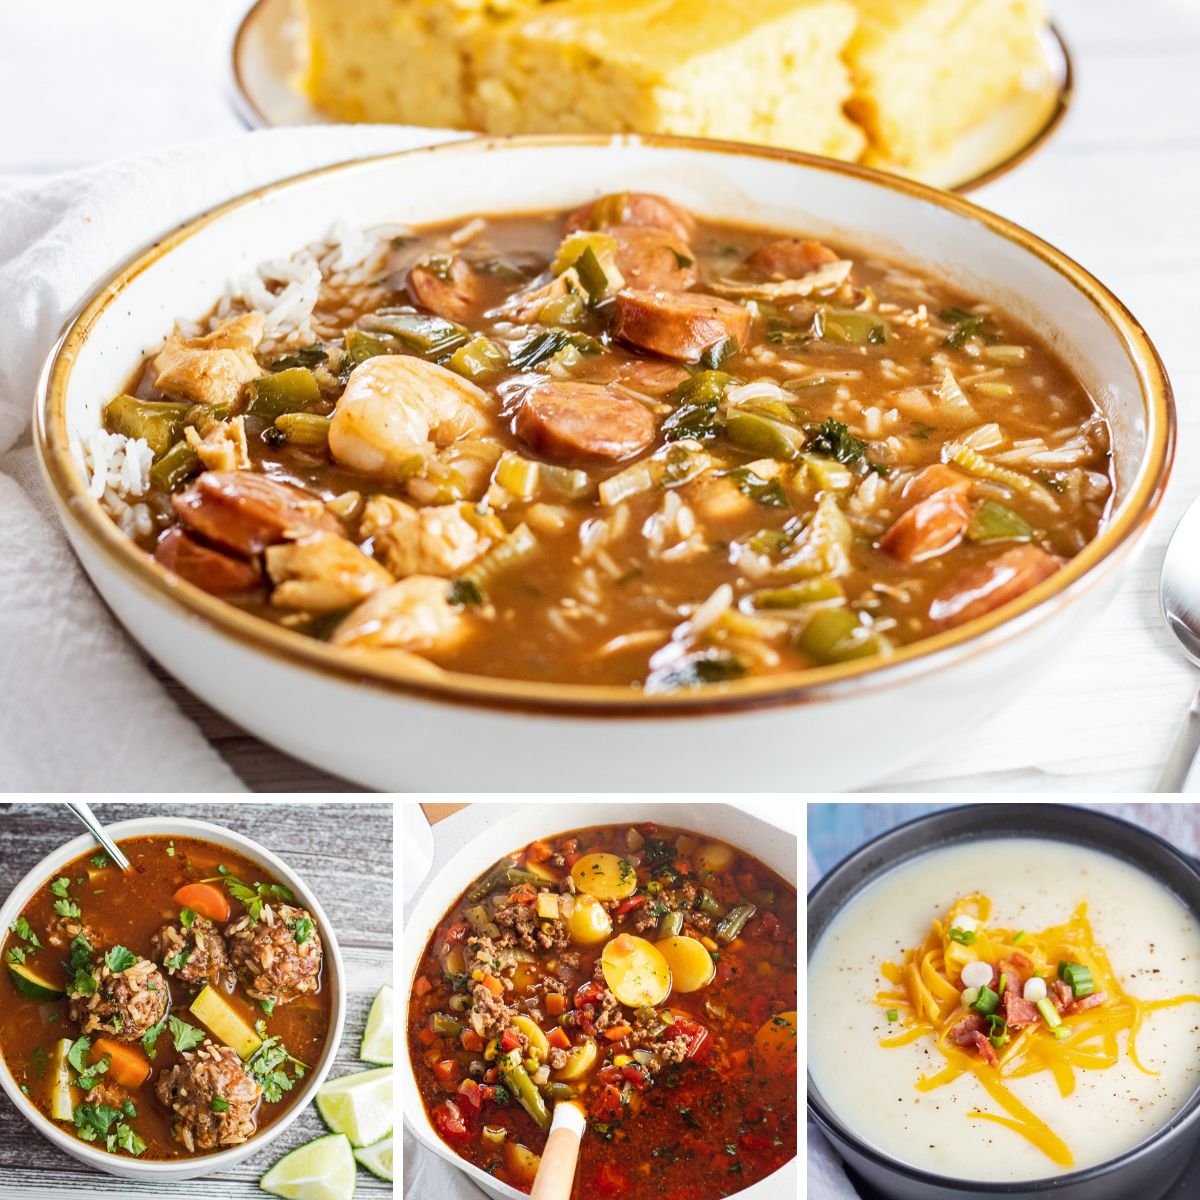 Best fall soup recipes collage image featuring 4 cozy comfort food soups to warm up with.